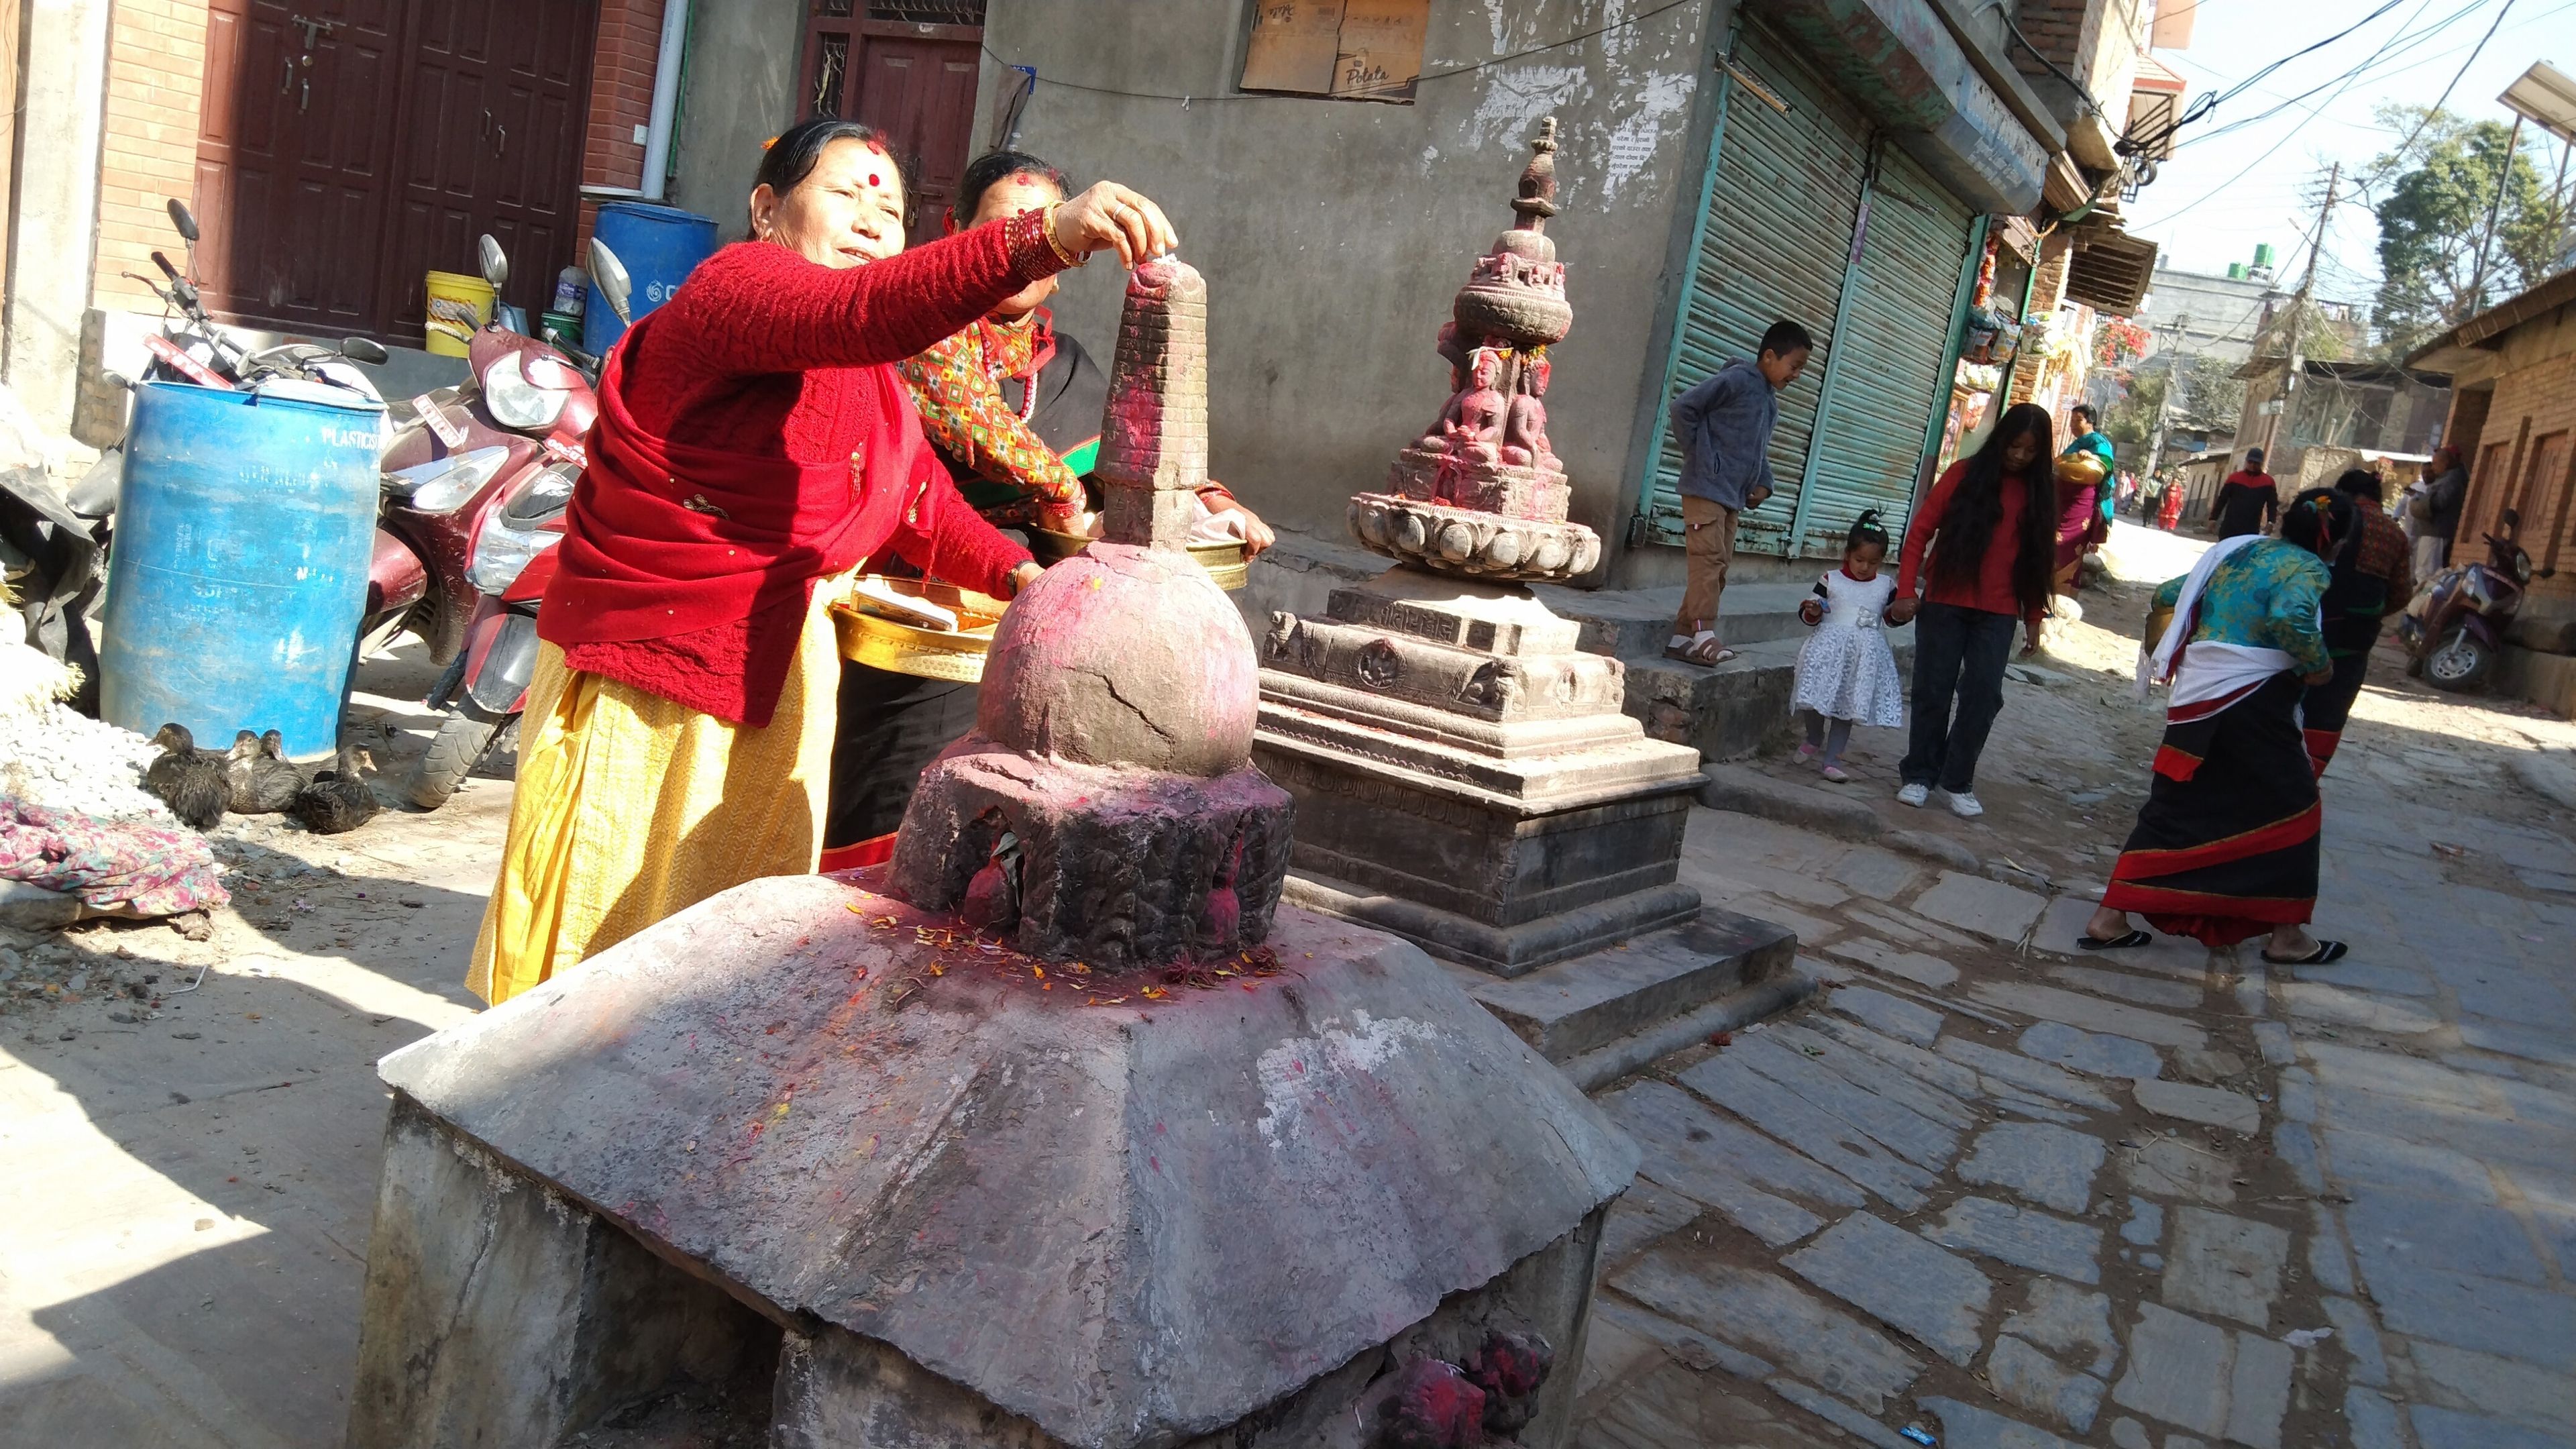 Women worshipping at a shrine in Bangmati Village, from where a Shreedhar Vishnu idol was stolen. The idol would later appear in the collection of New York's Metropolitan Museum of Art